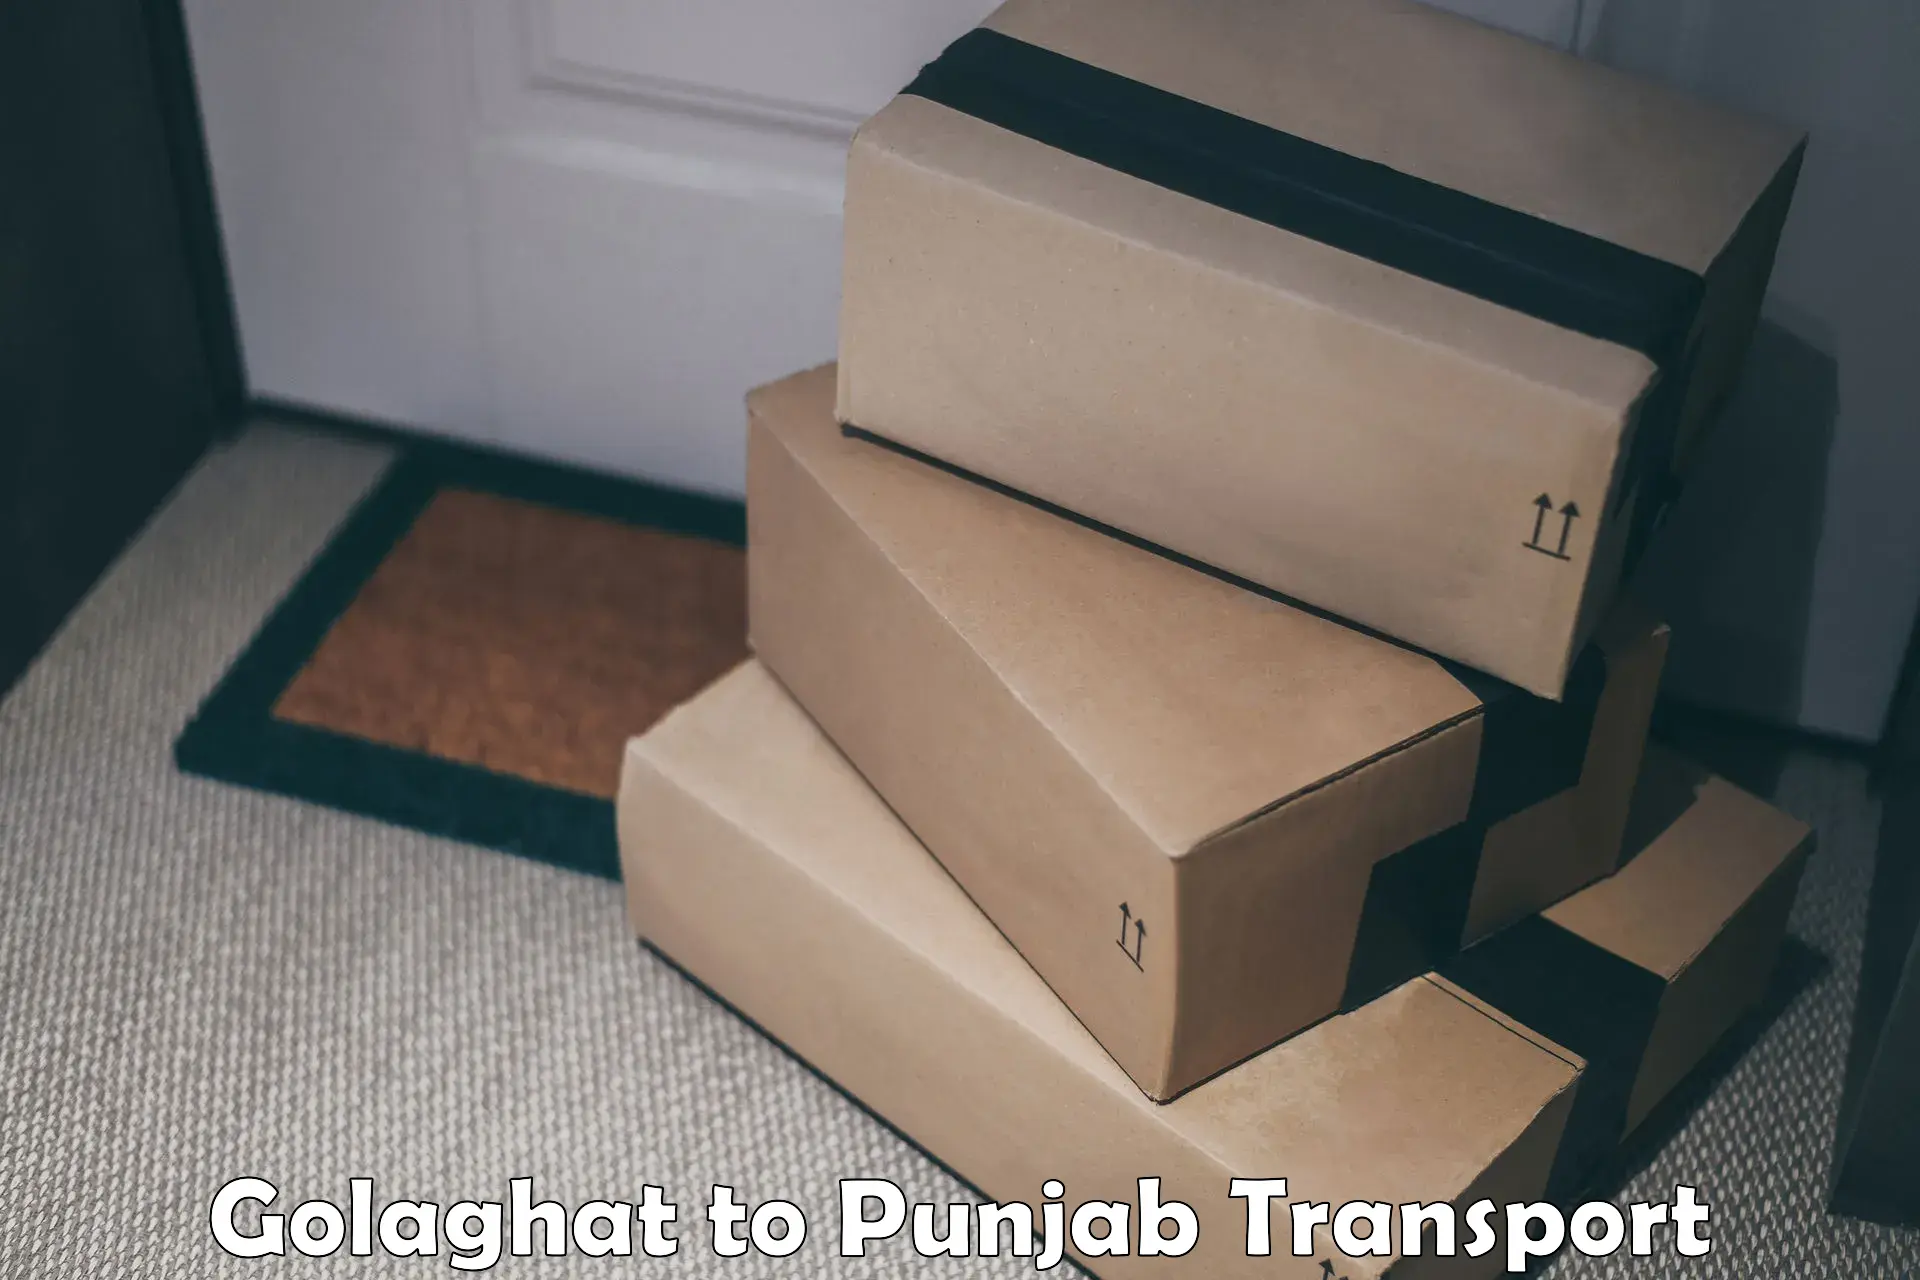 Container transport service Golaghat to Amritsar